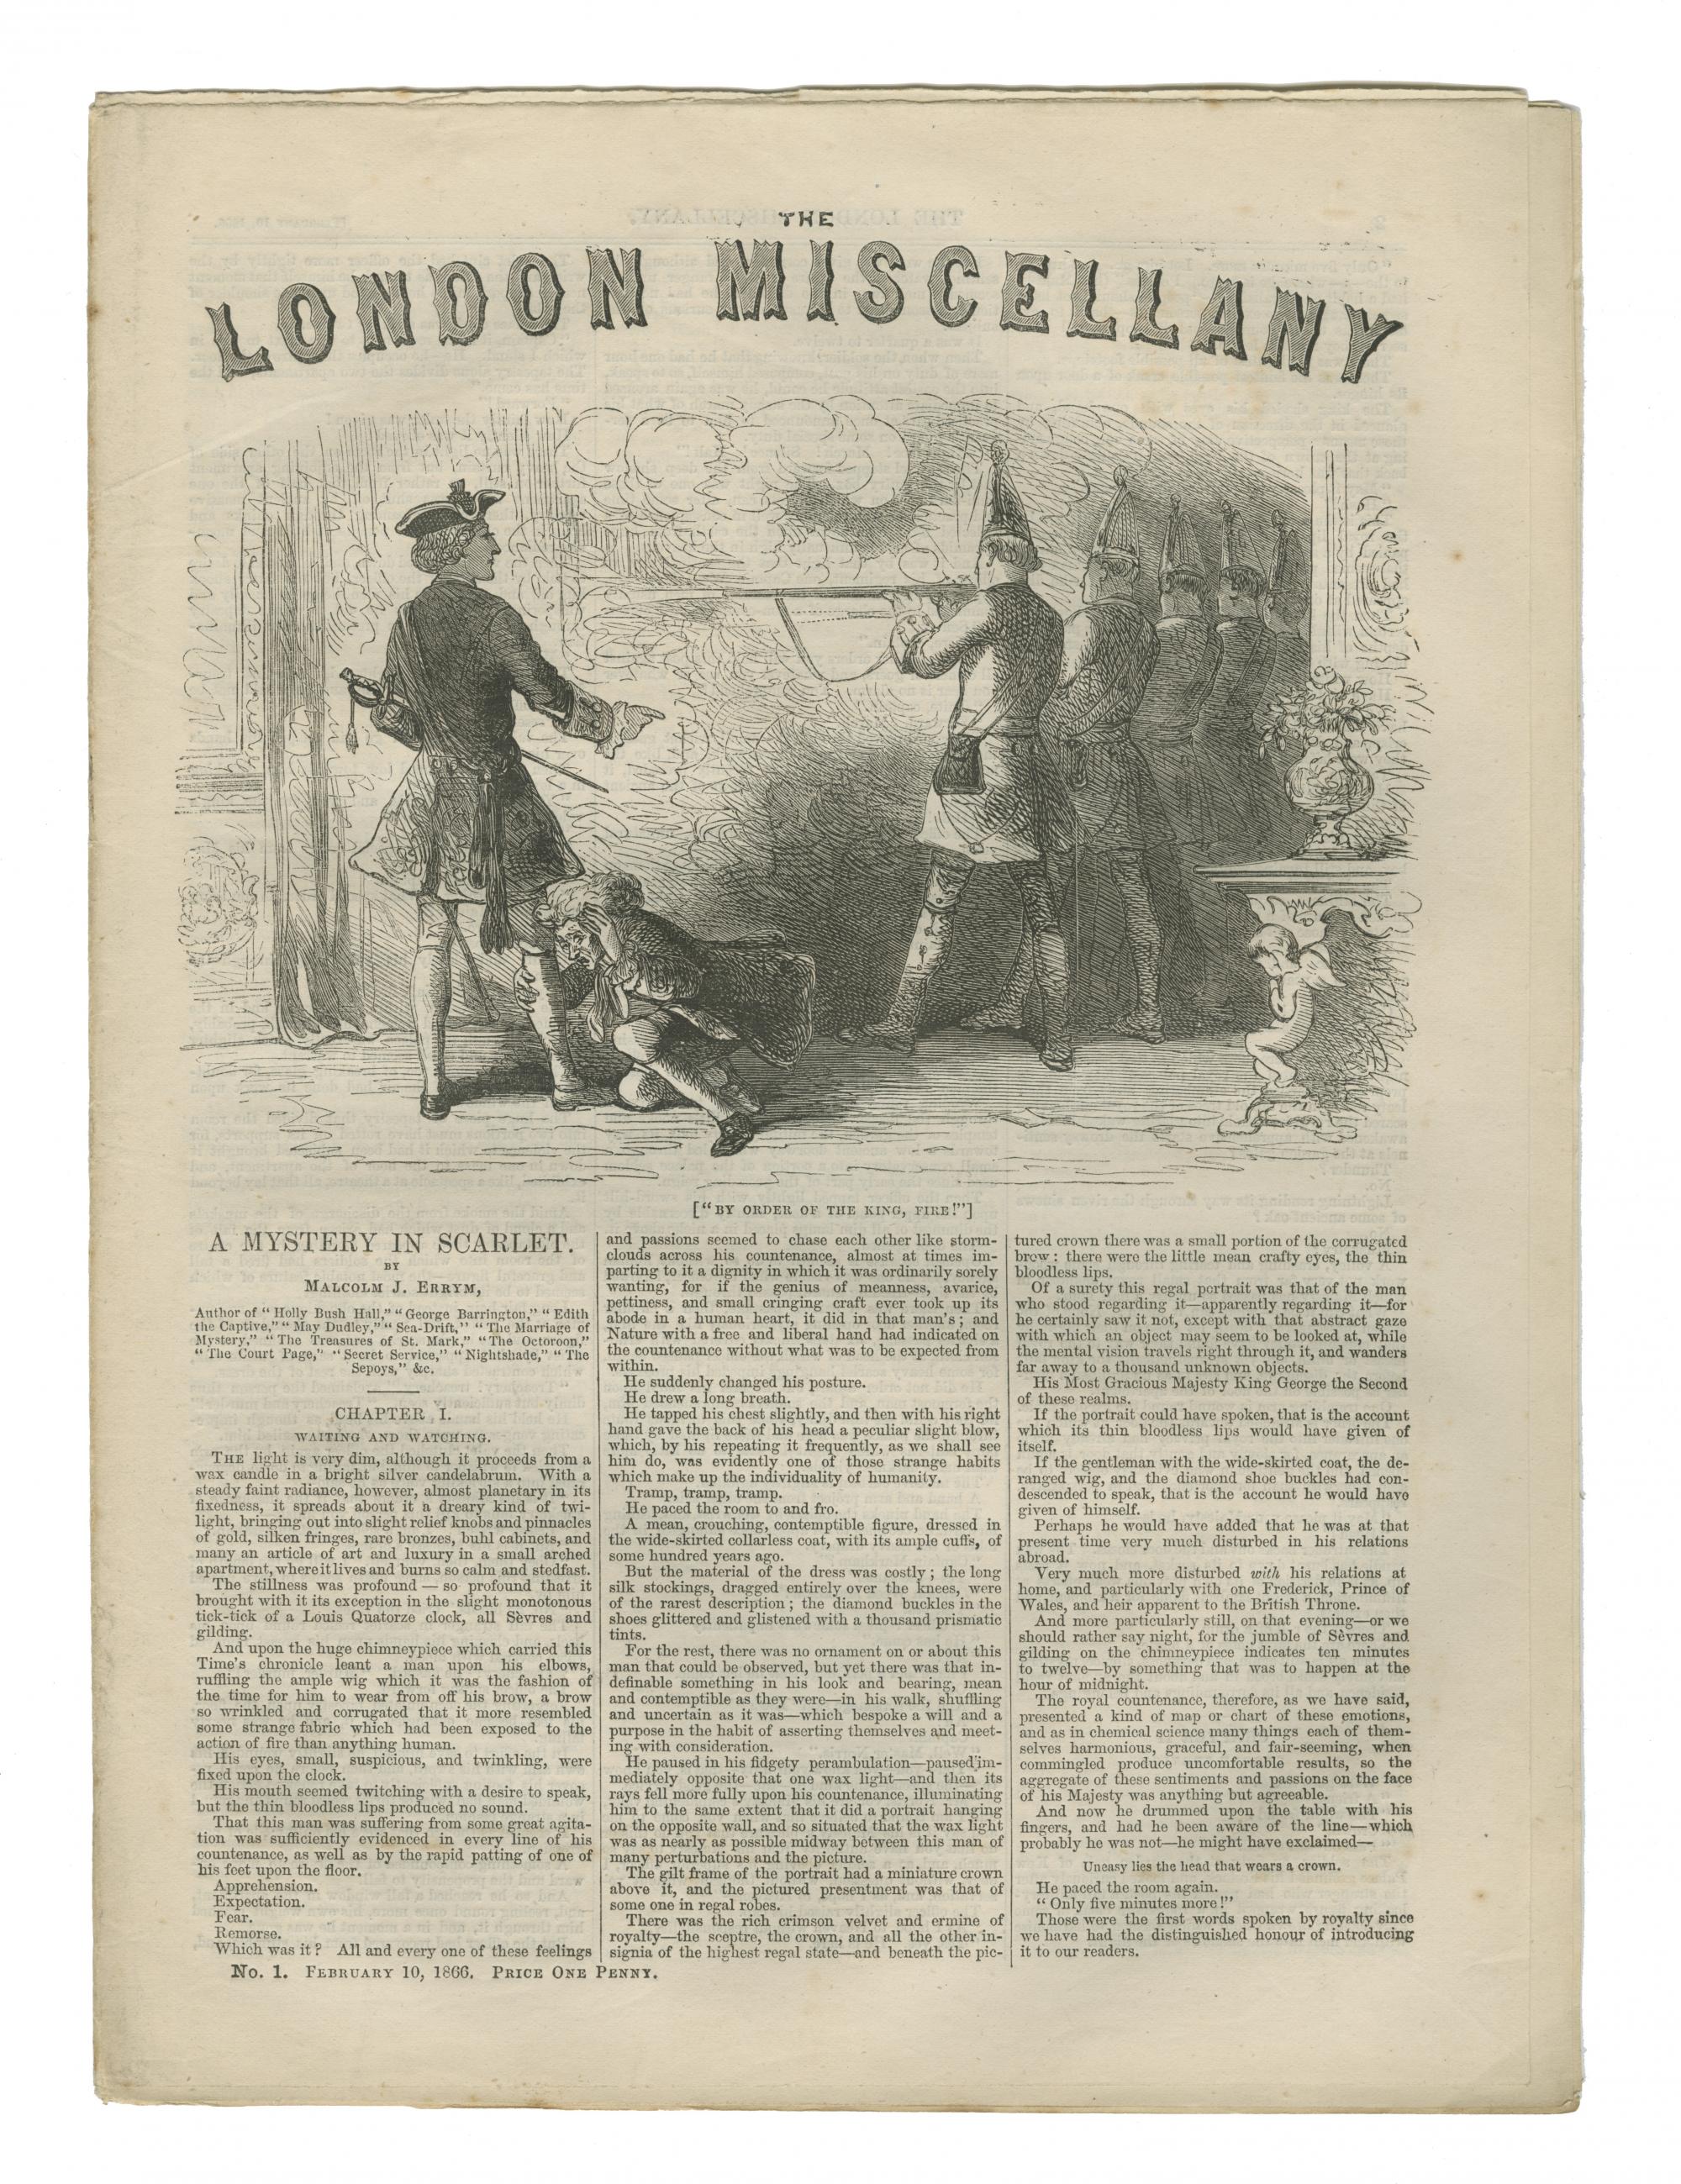 "'By order of the King, Fire!'" The London Miscellany 1 (10 Feb 1866), 1